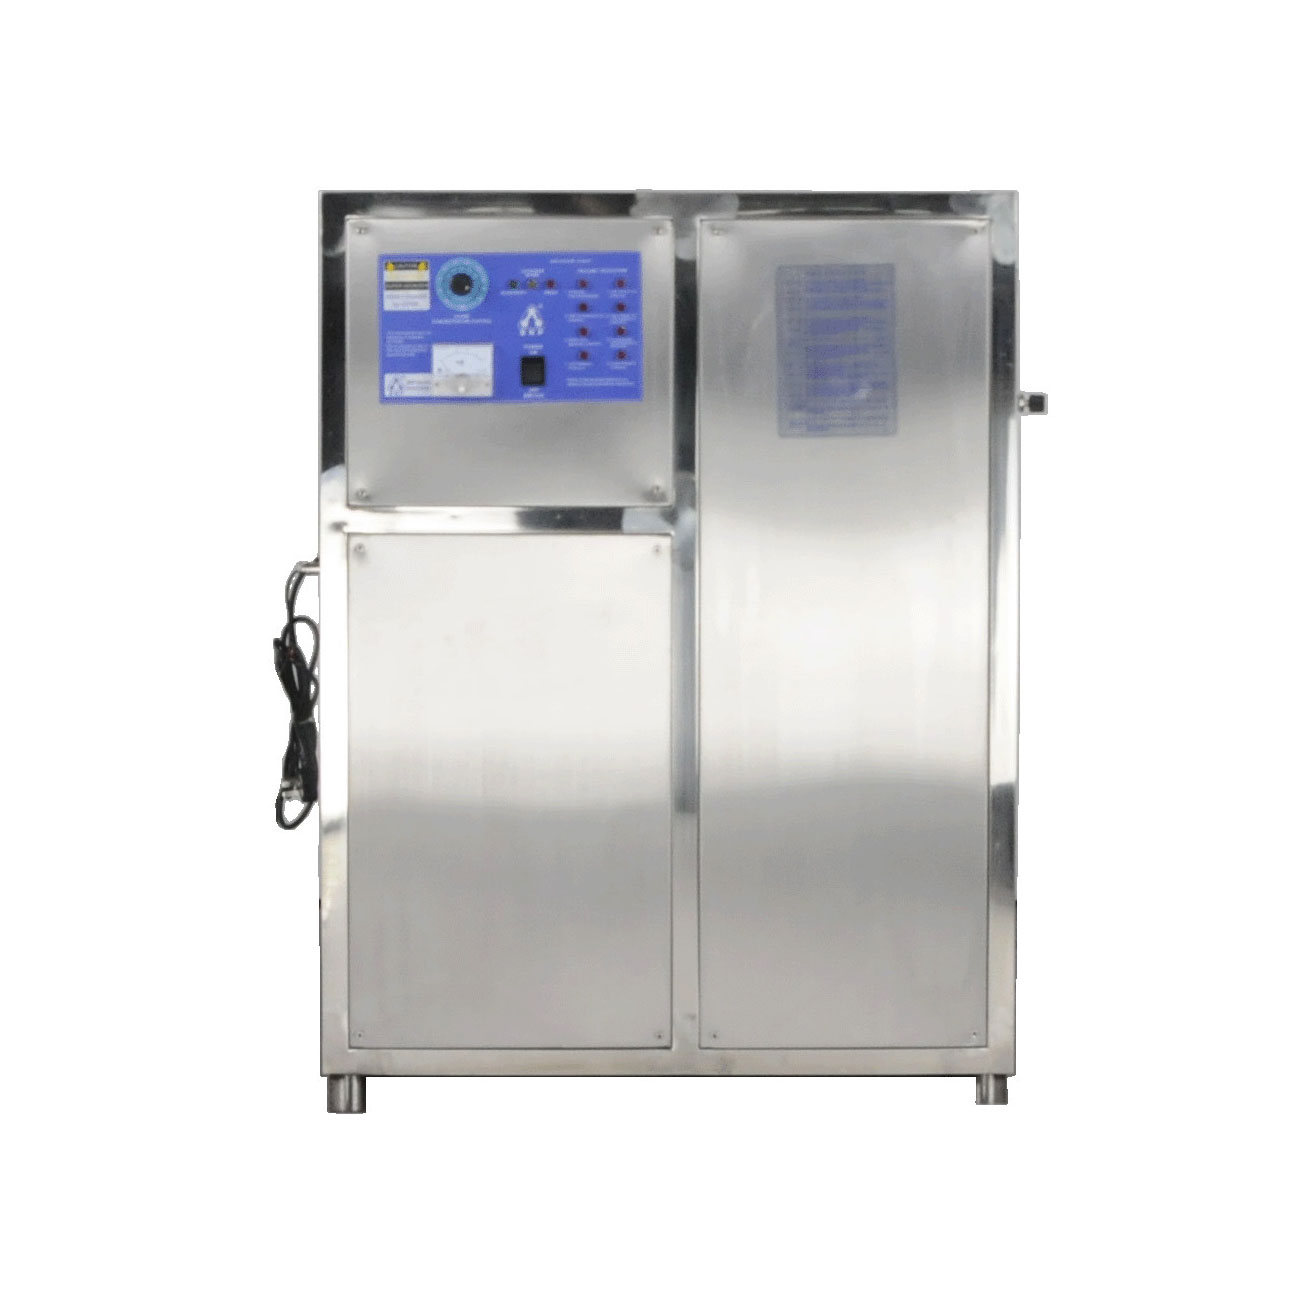 Factory Cheap Aquaculture Ozone Generator - Reliable Supplier China BNP SOZ-YW-200G Industrial Oxygen-Enriched Ozone Generator for Public Place Air Purifier and O3 Sterilizer Water Disinfection &#...